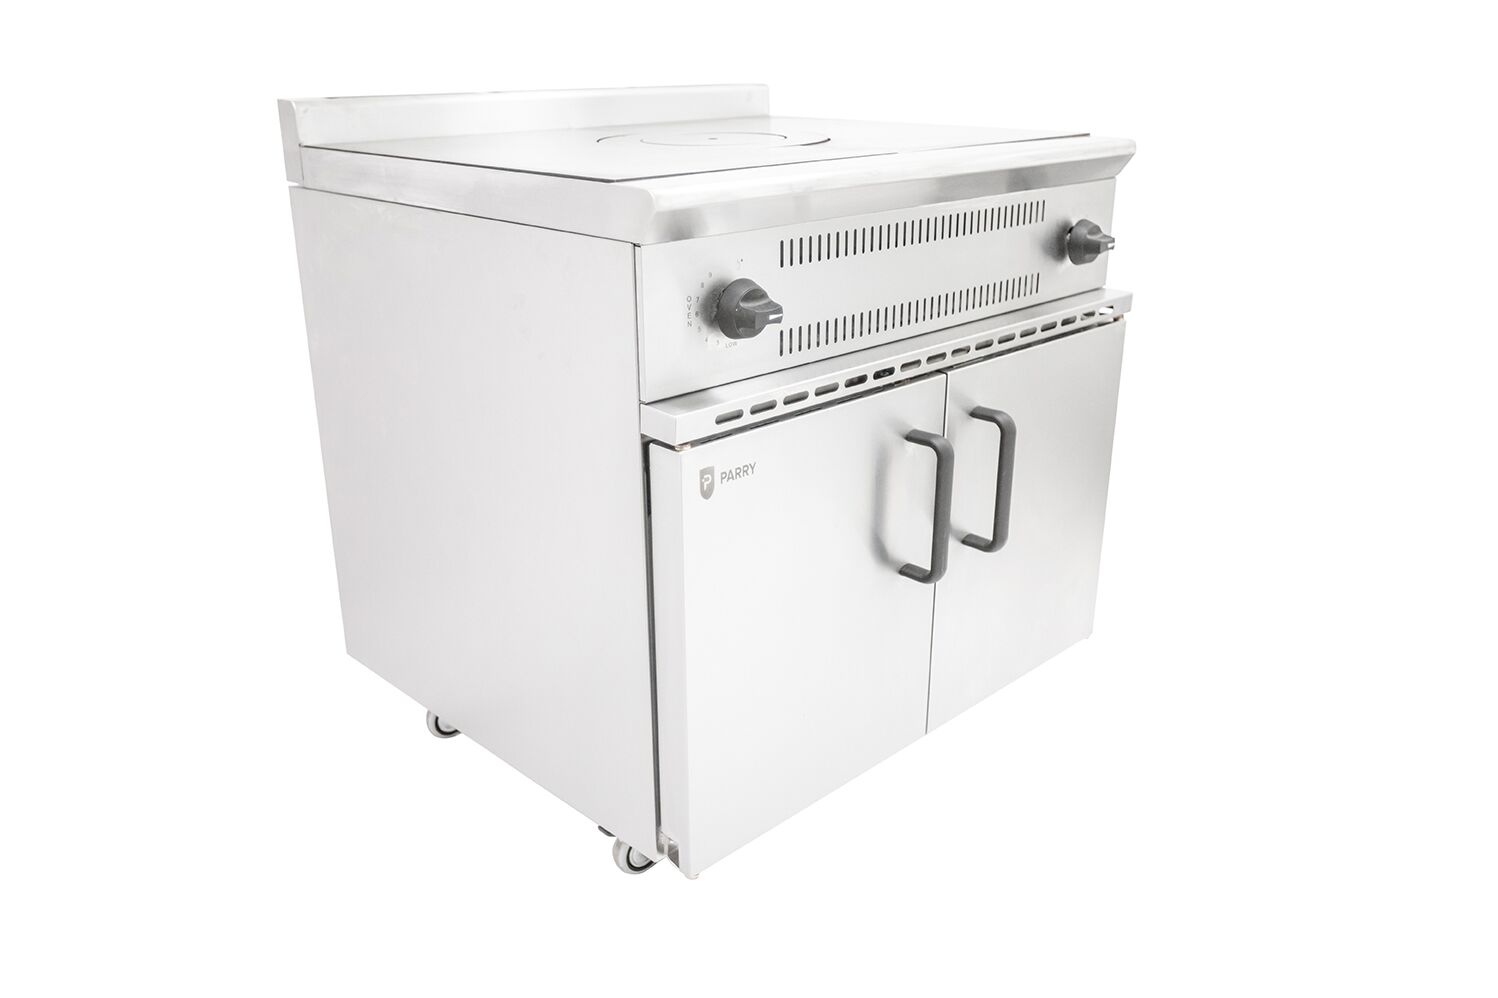 Parry USHO - Freestanding Commercial Gas Solid Top Oven